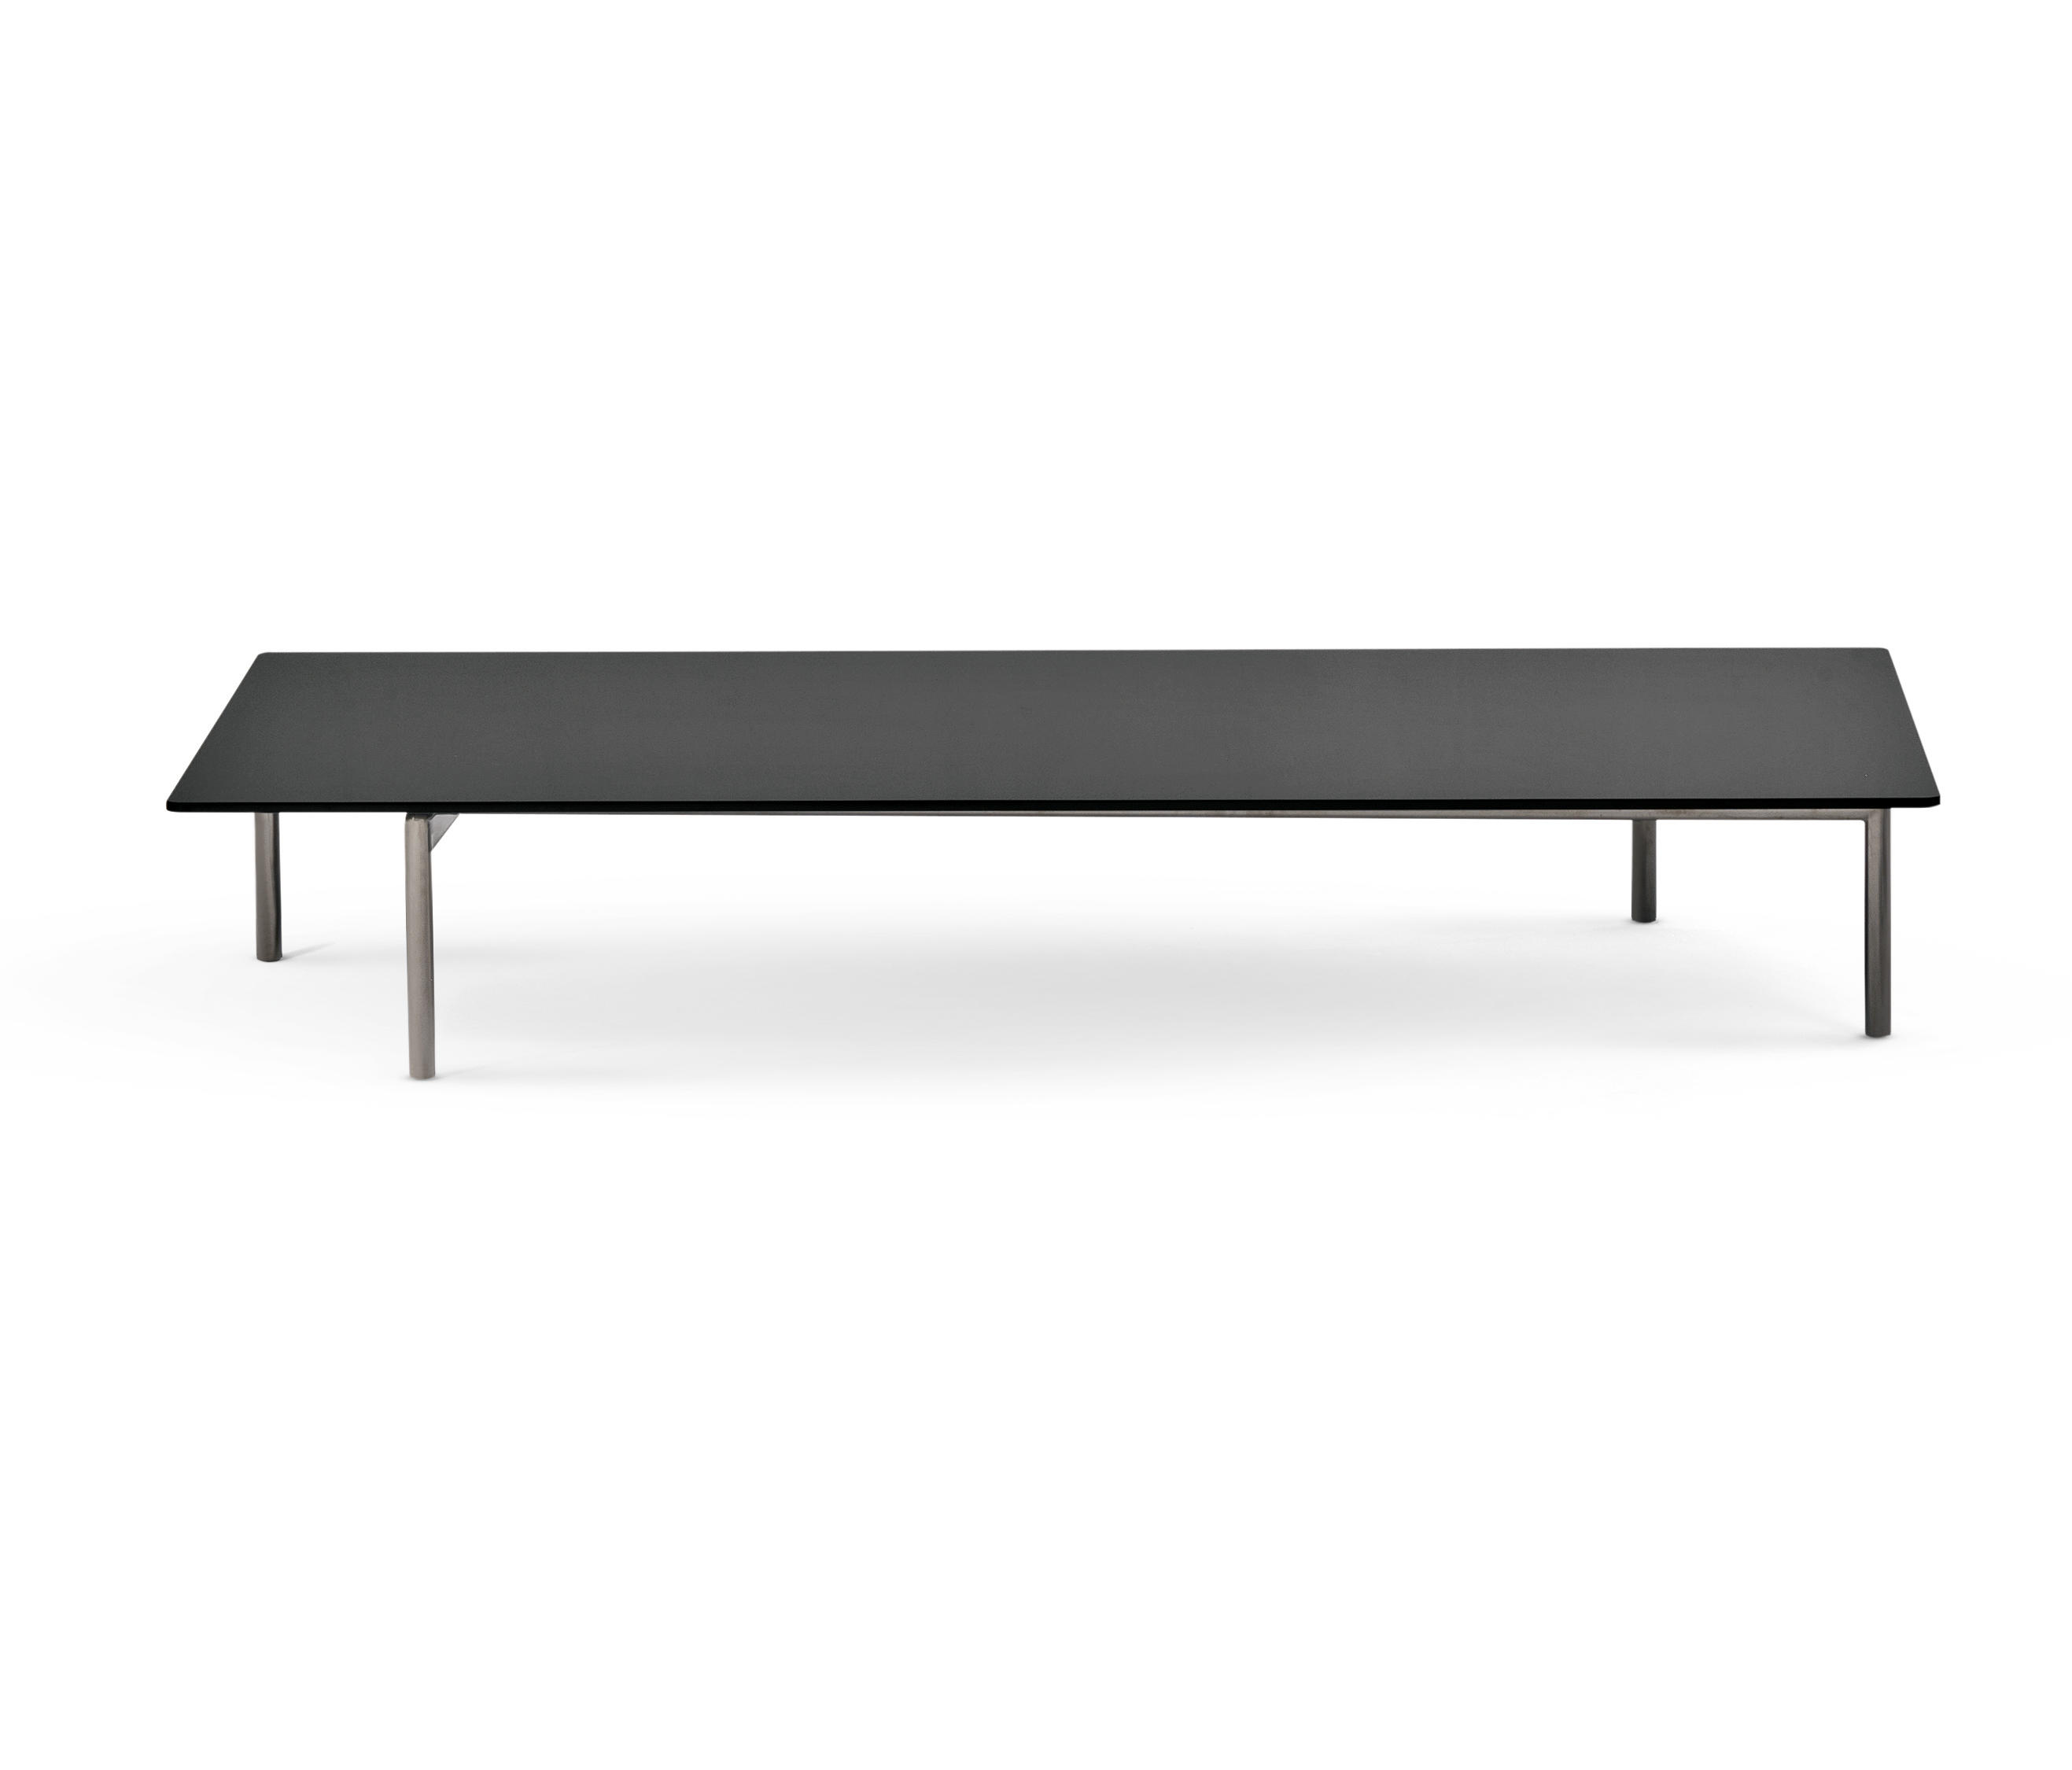 Taylor Low Tables & designer furniture | Architonic